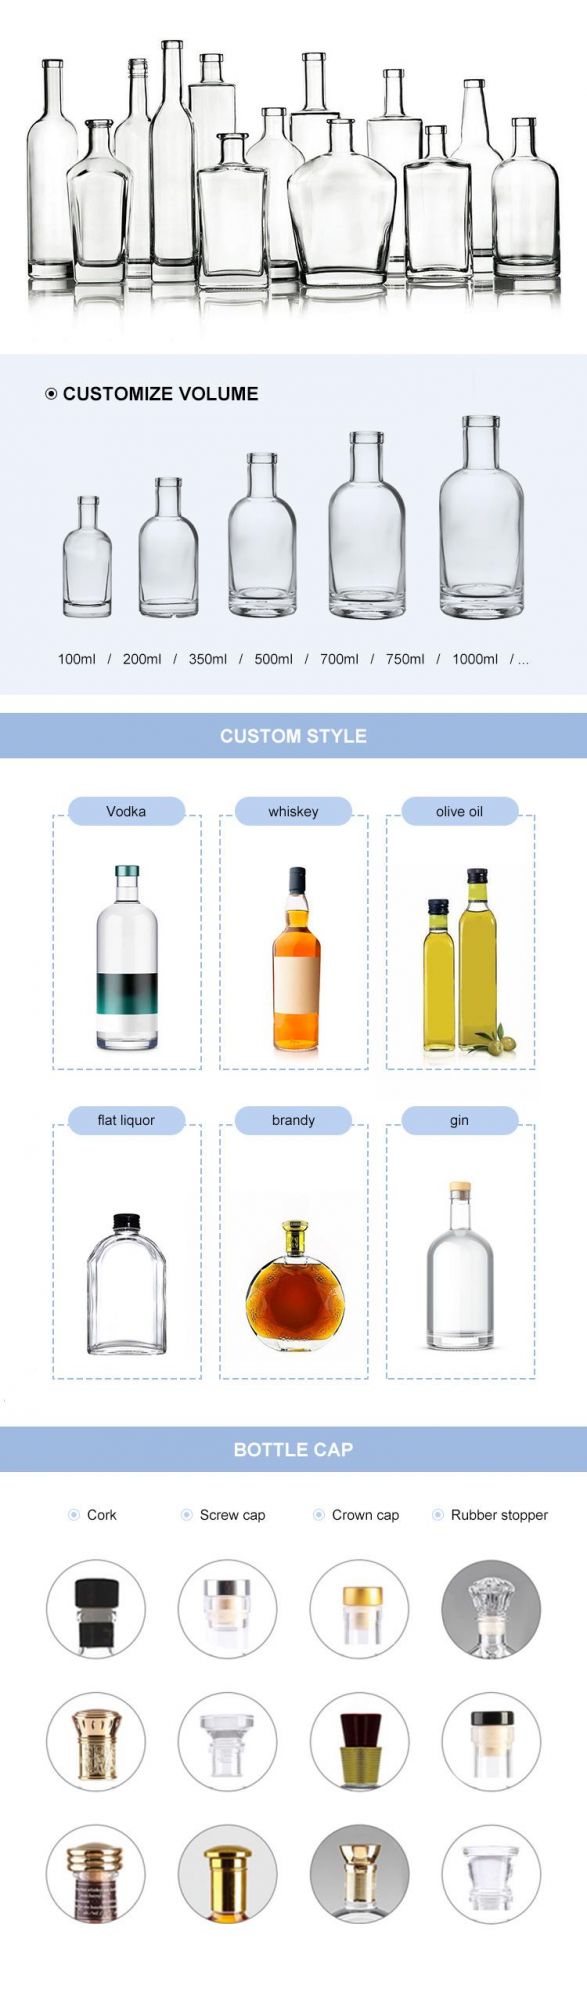 High Quality Frosted Beverage 100ml Mini Spirits Vodka Gin Liquor Glass Bottle with Wood Cork